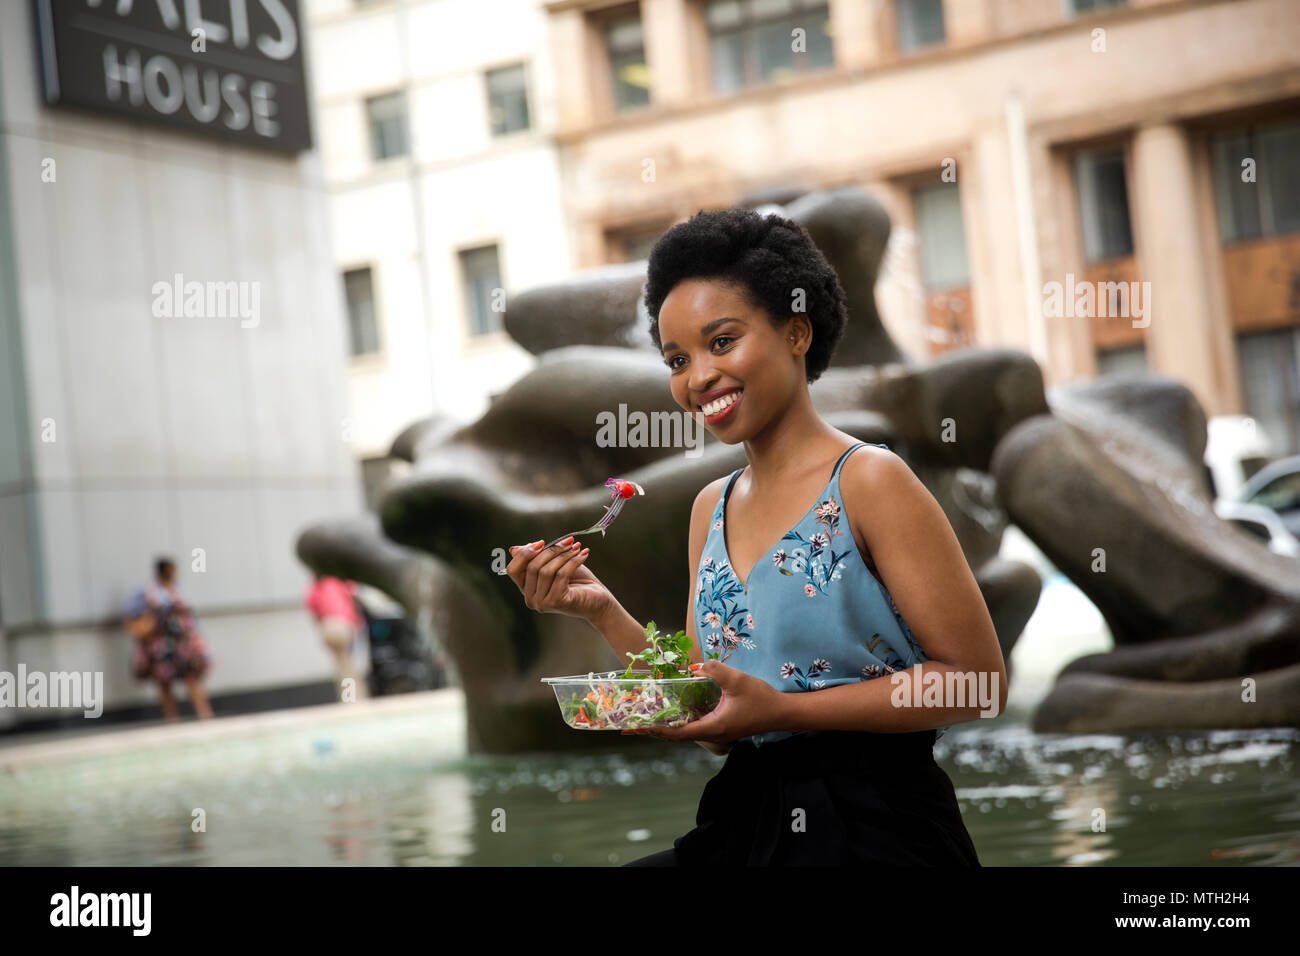 Woman eating salad Banque D'Images